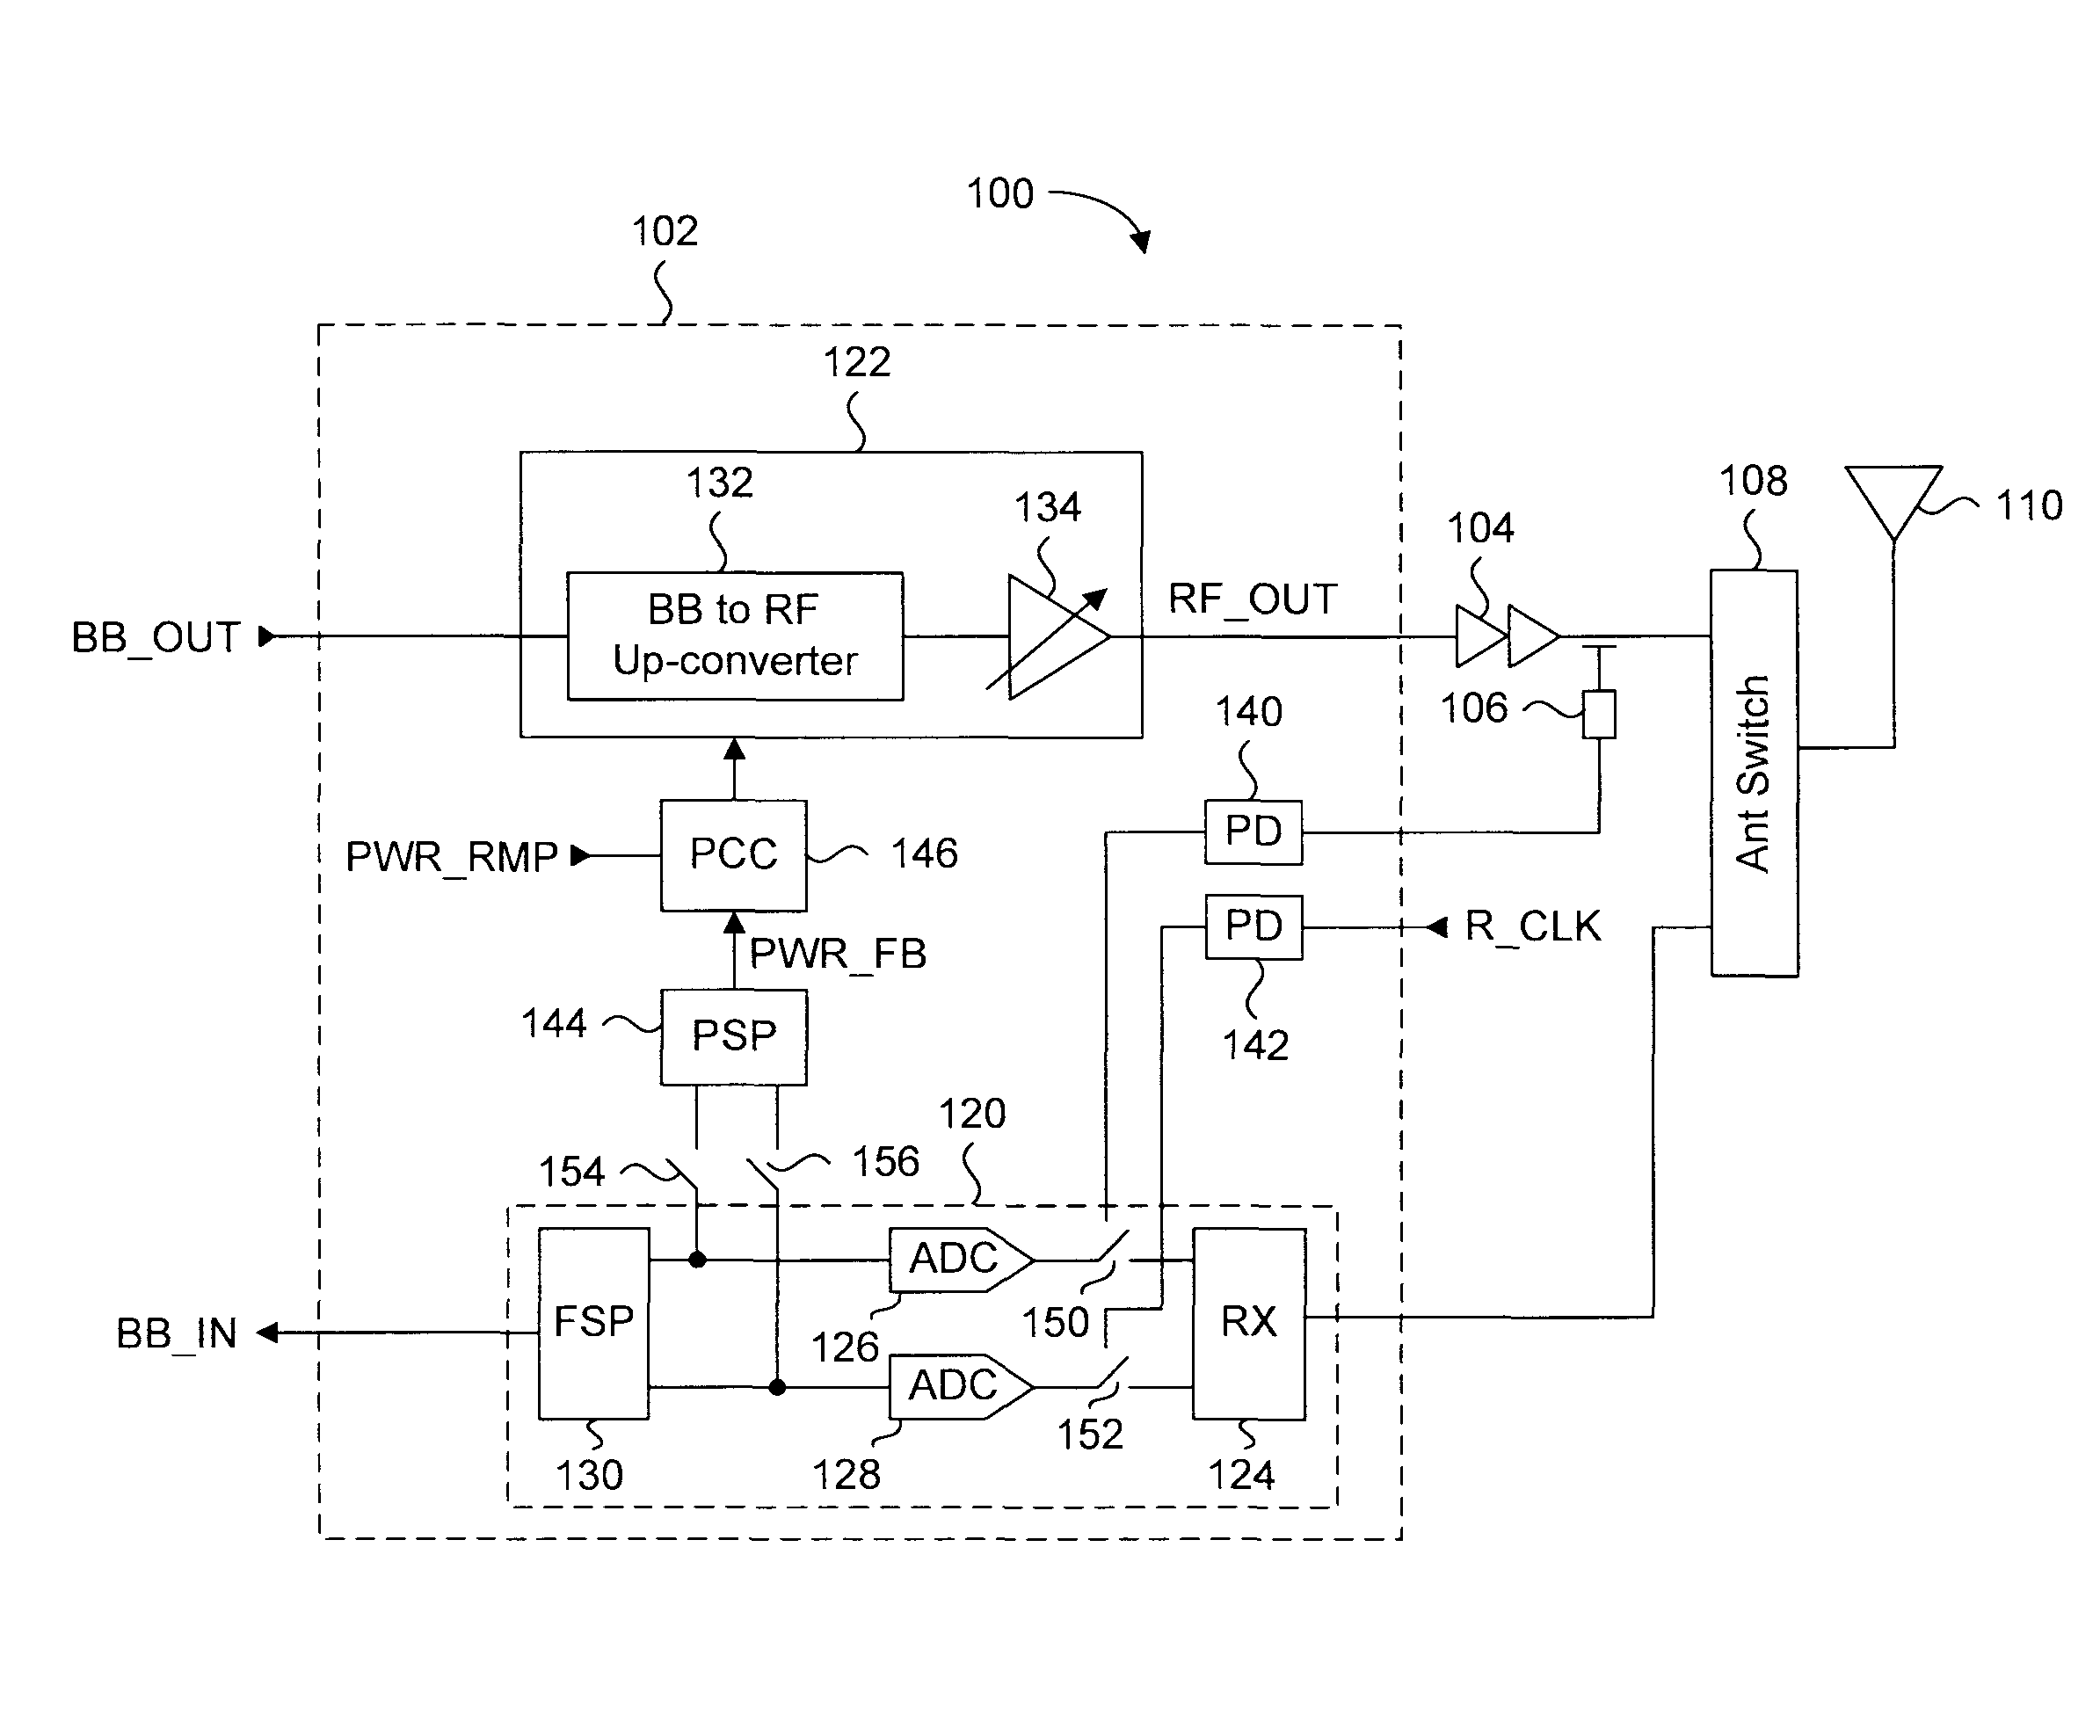 Closed-loop digital power control for a wireless transmitter